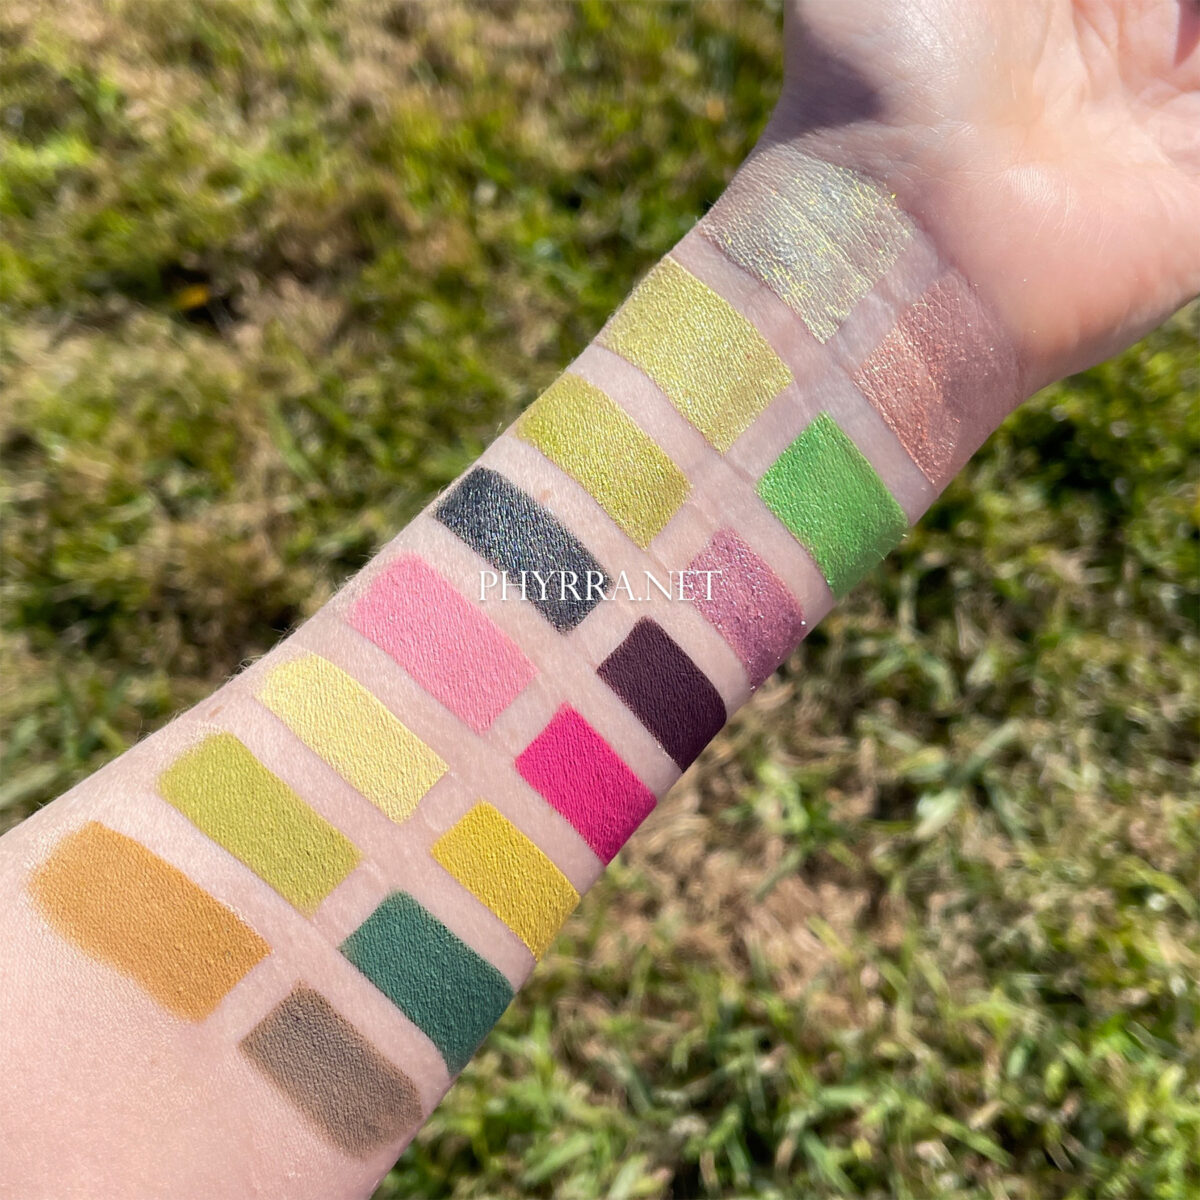 Hela Palette swatches on very fair skin